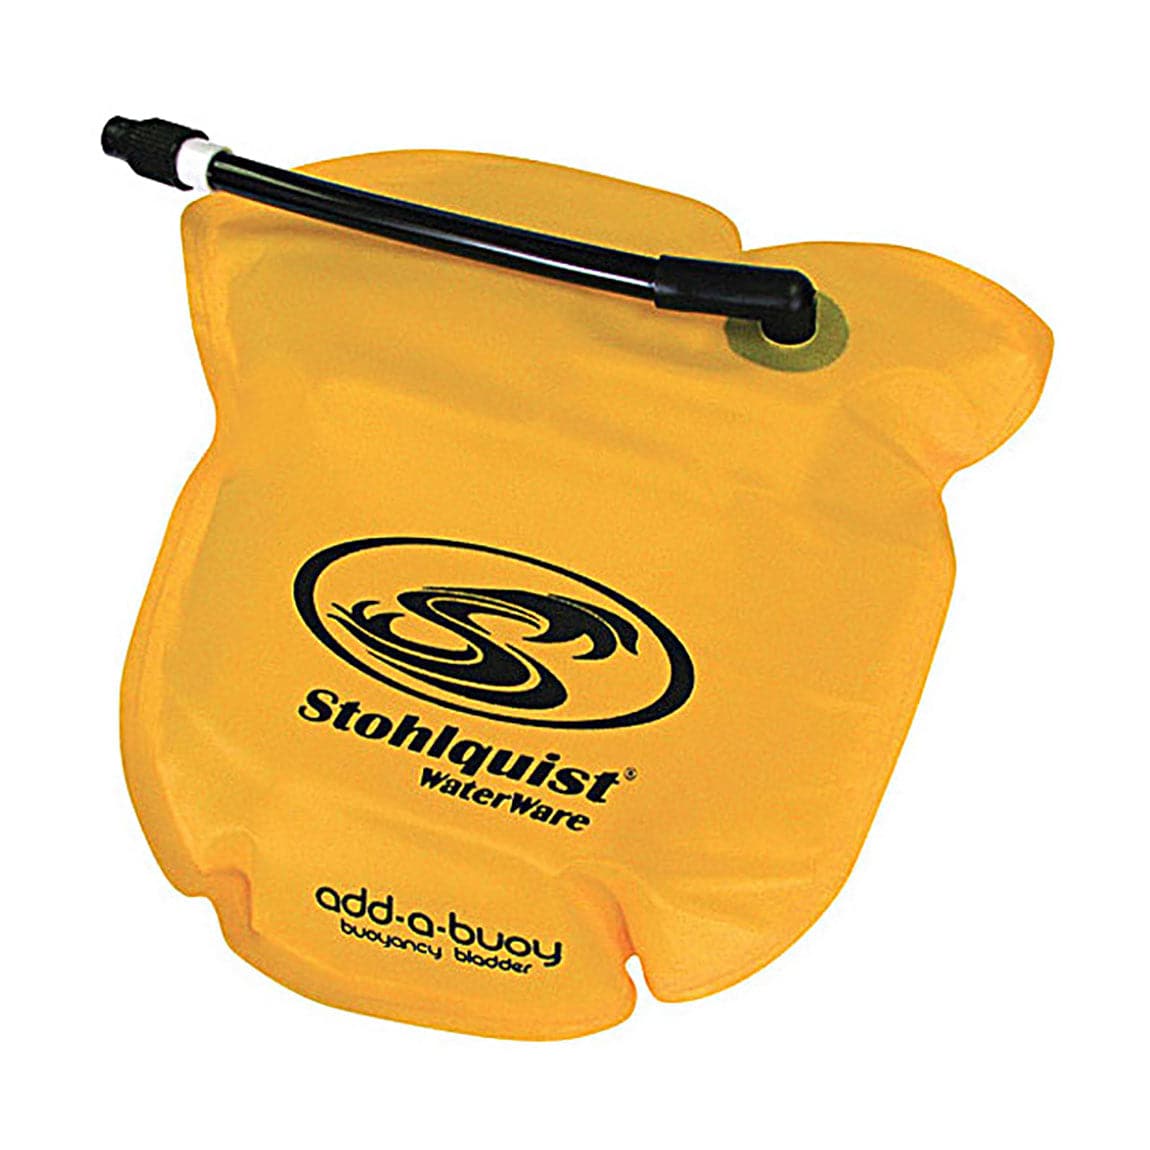 Featuring the Add-A-Buoy Buoyancy Bladder pfd accessory, rescue pfd manufactured by Stohlquist shown here from one angle.